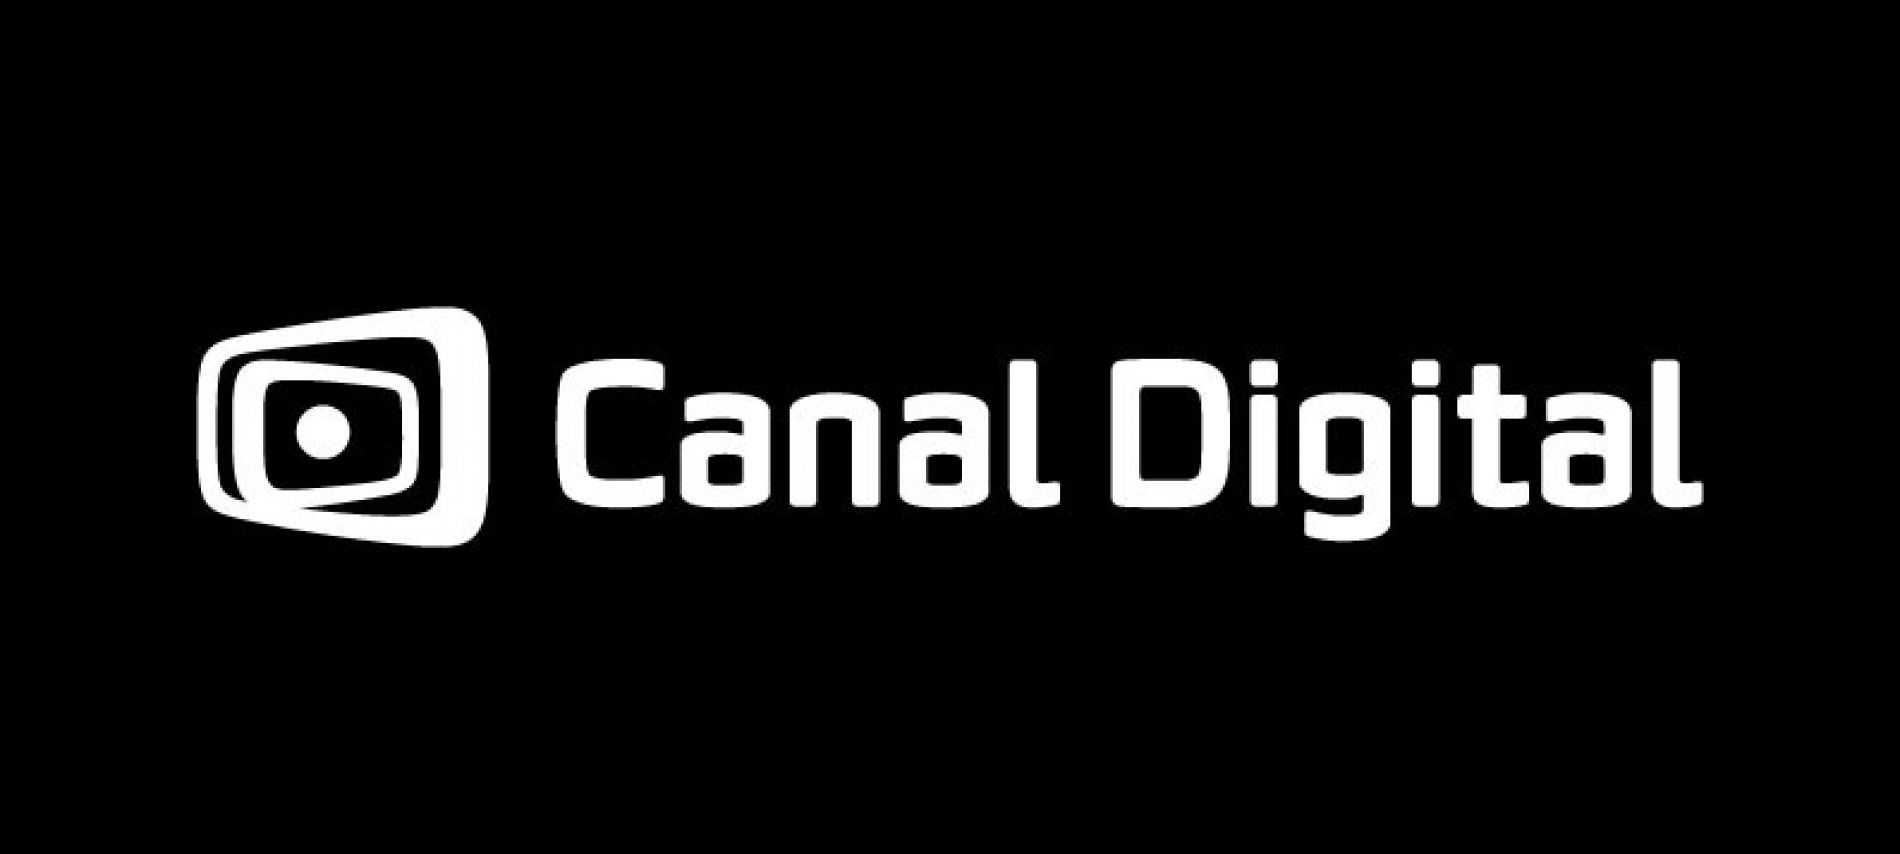 'What We Started' in Canal Digital spot.